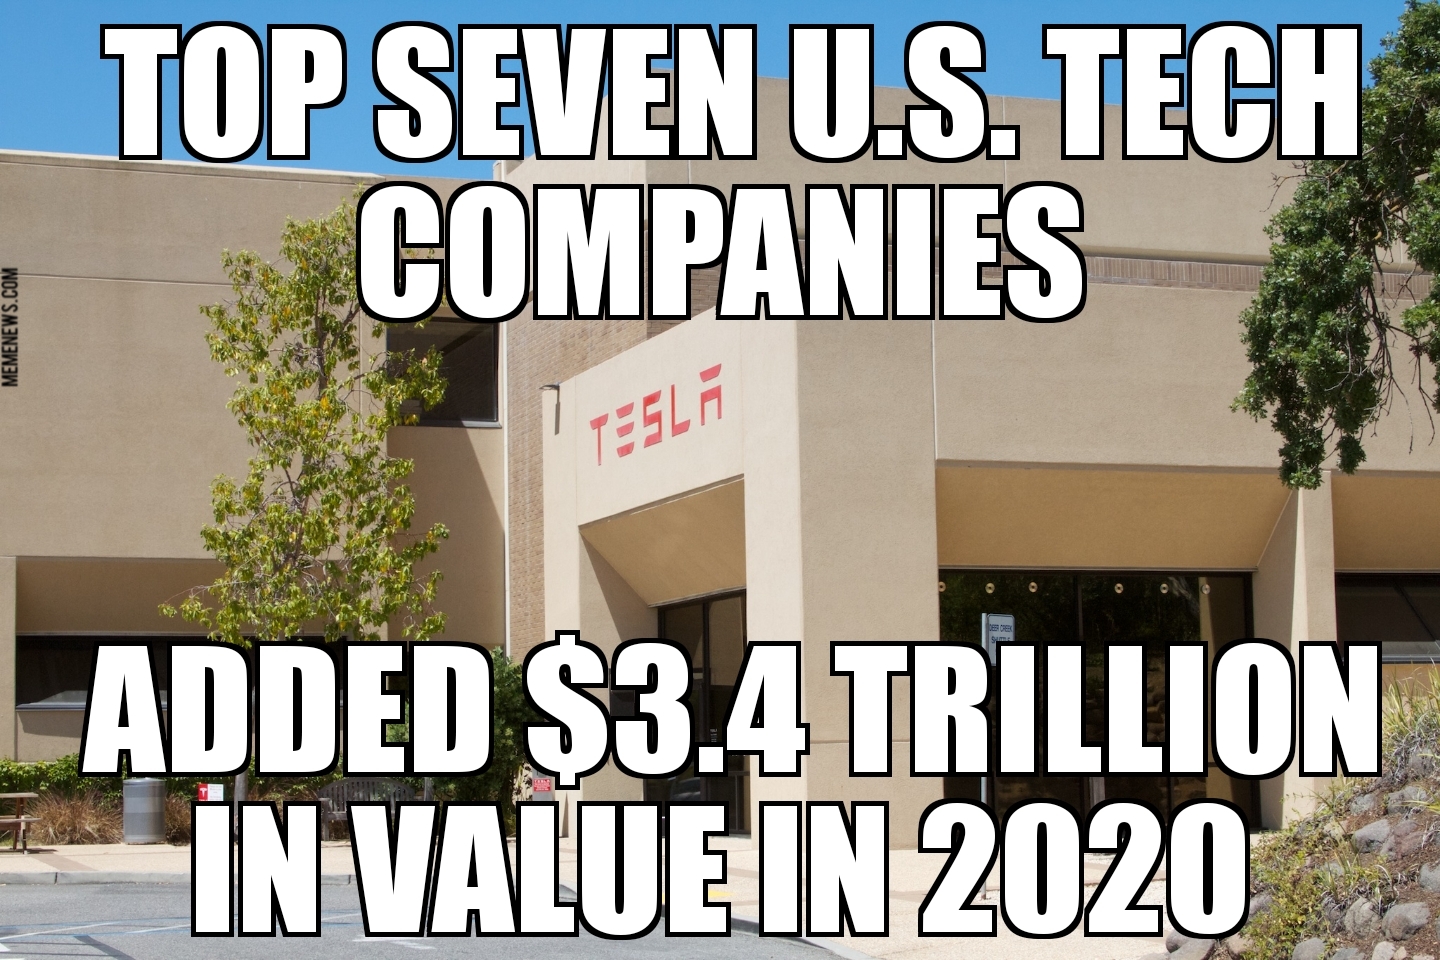 Tech adds $3.4 trillion in 2020